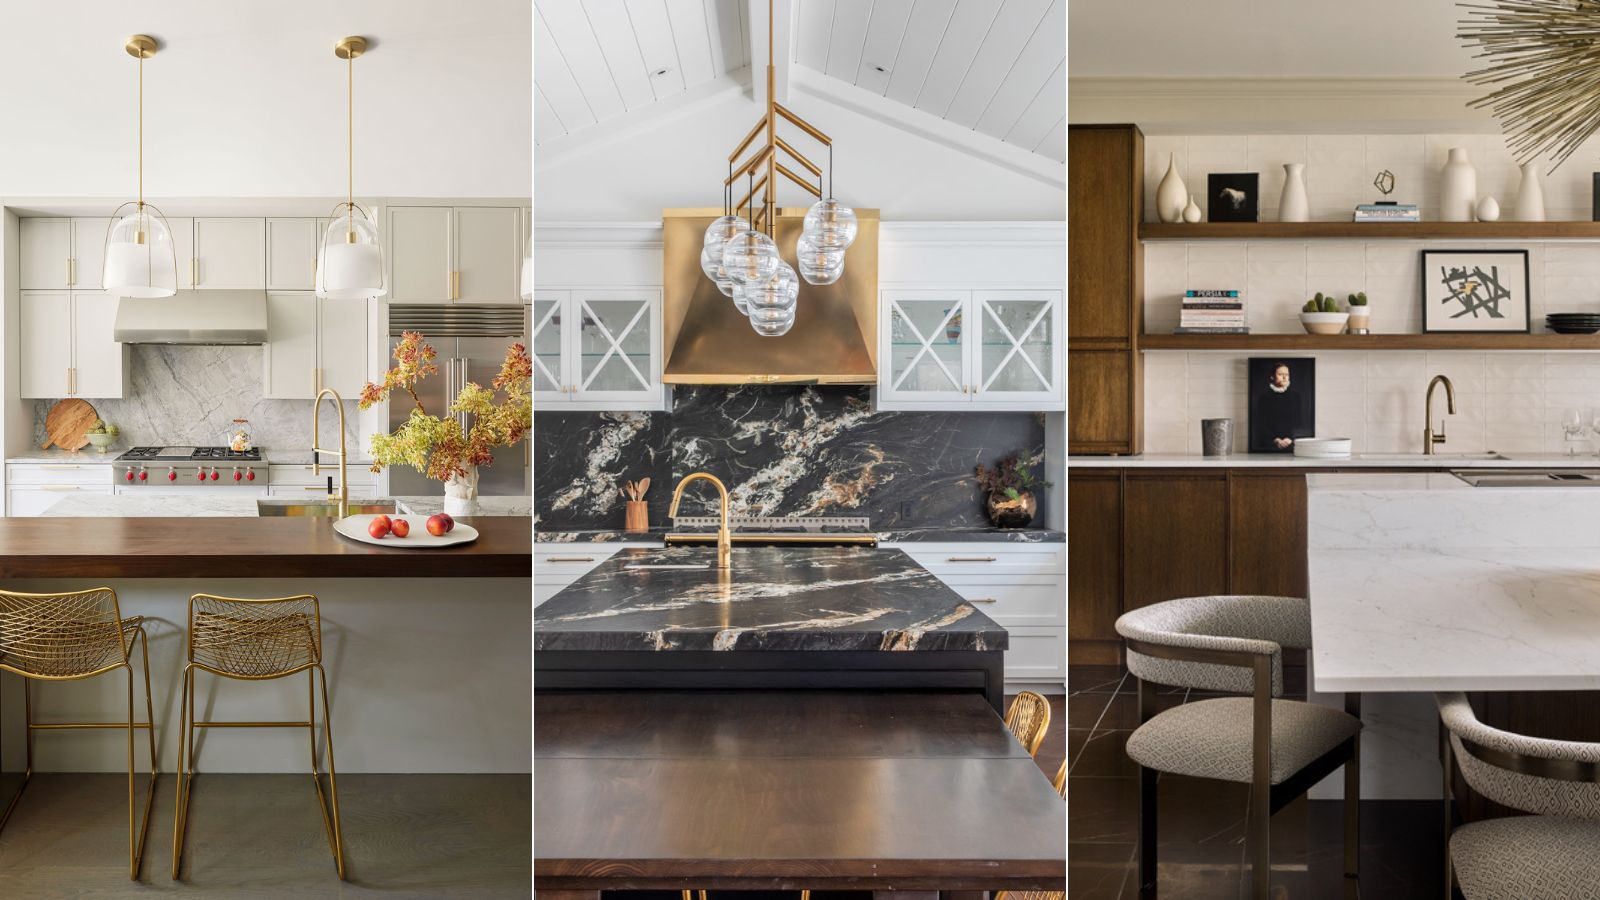 Two-tier kitchen islands are the future of kitchen design